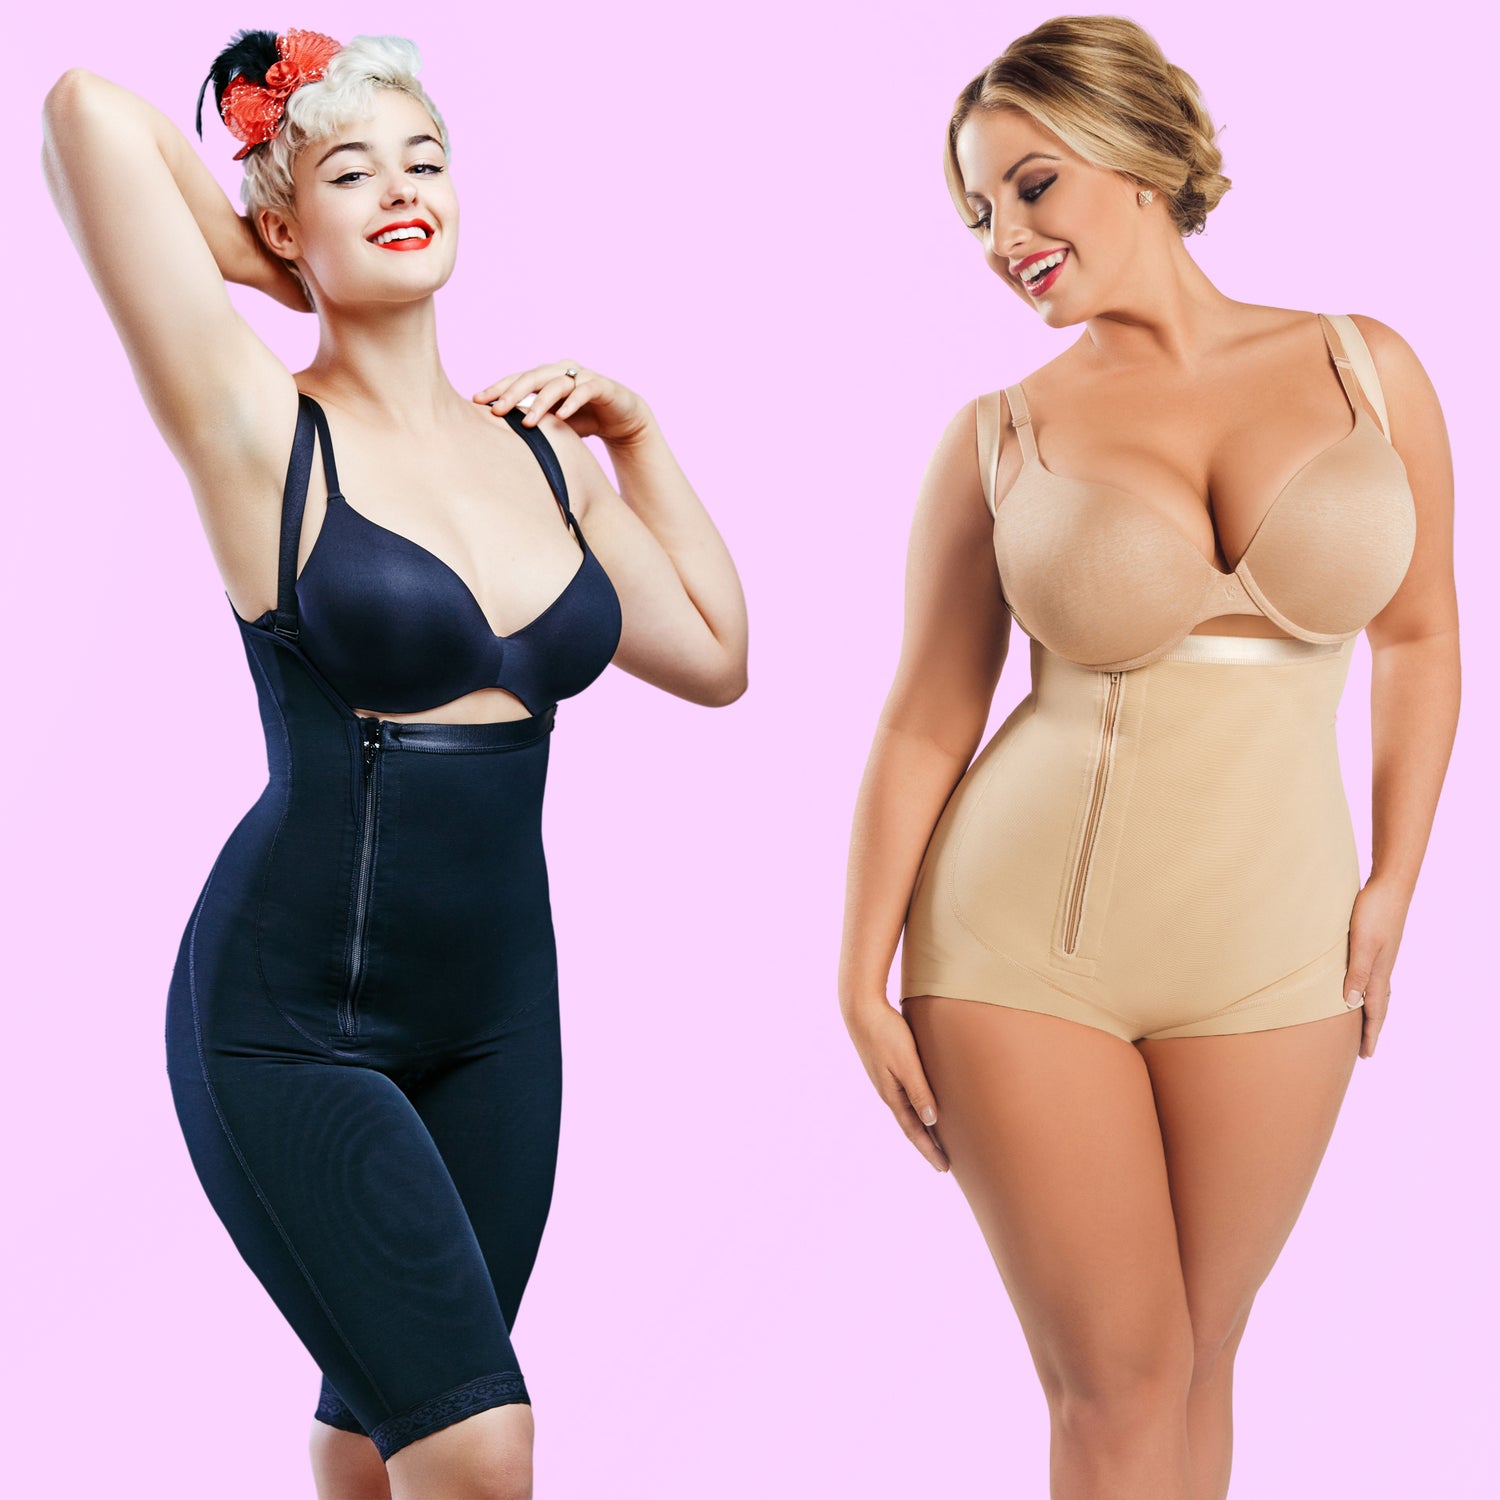 HOW TO MEASURE YOURSELF FOR SHAPEWEAR